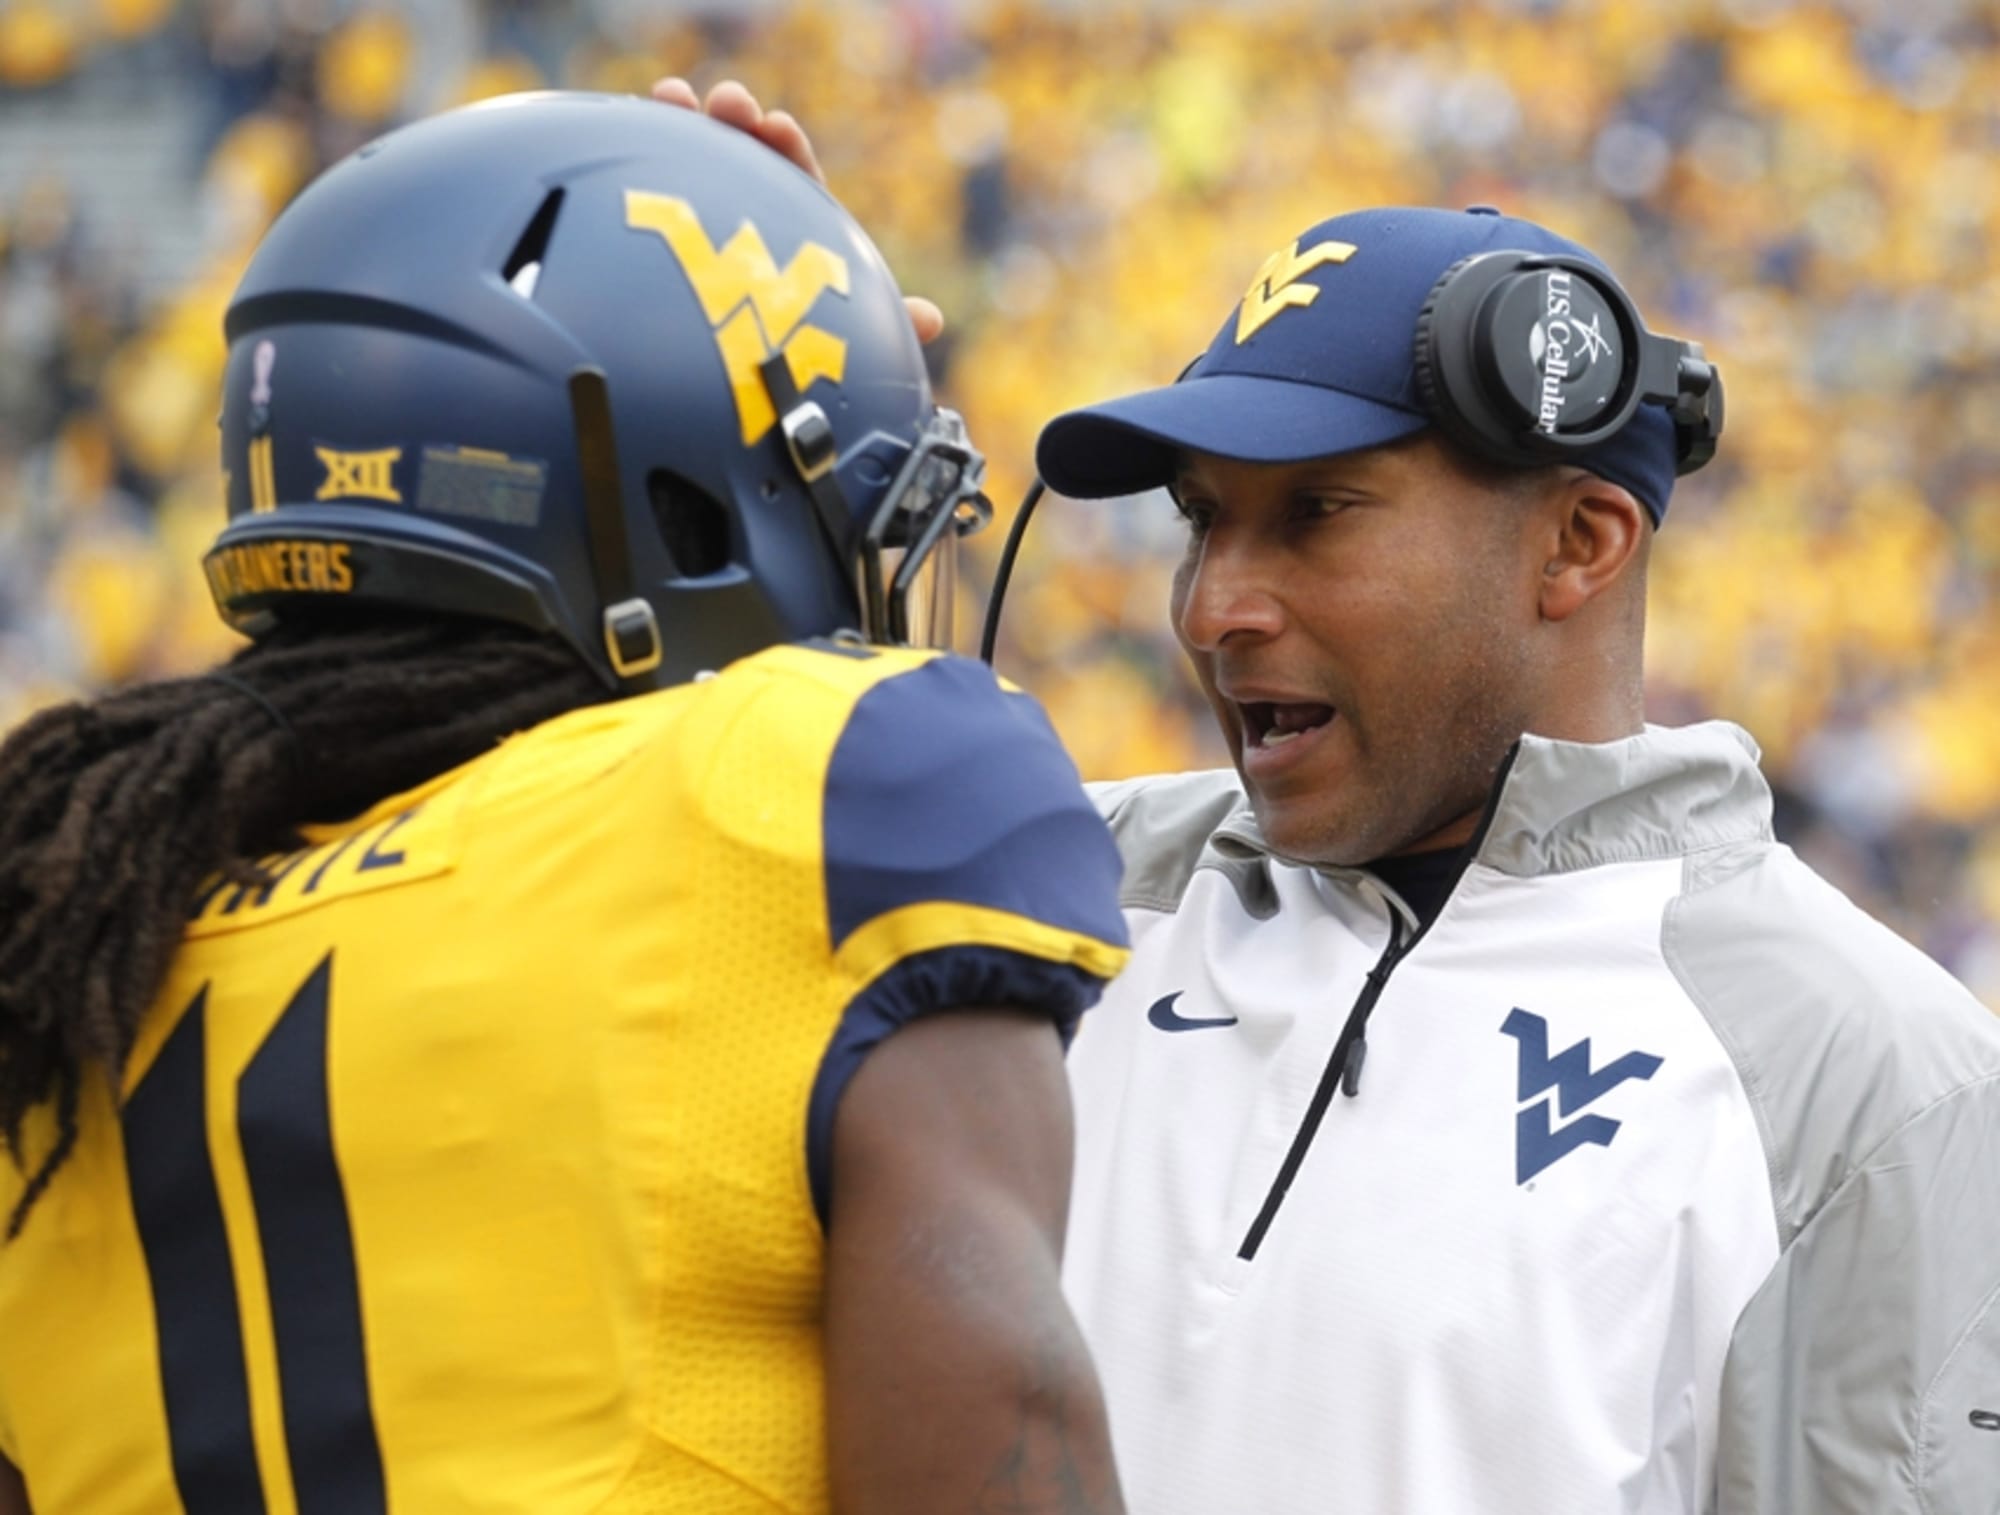 Lonnie Galloway leaves WVU for Louisville